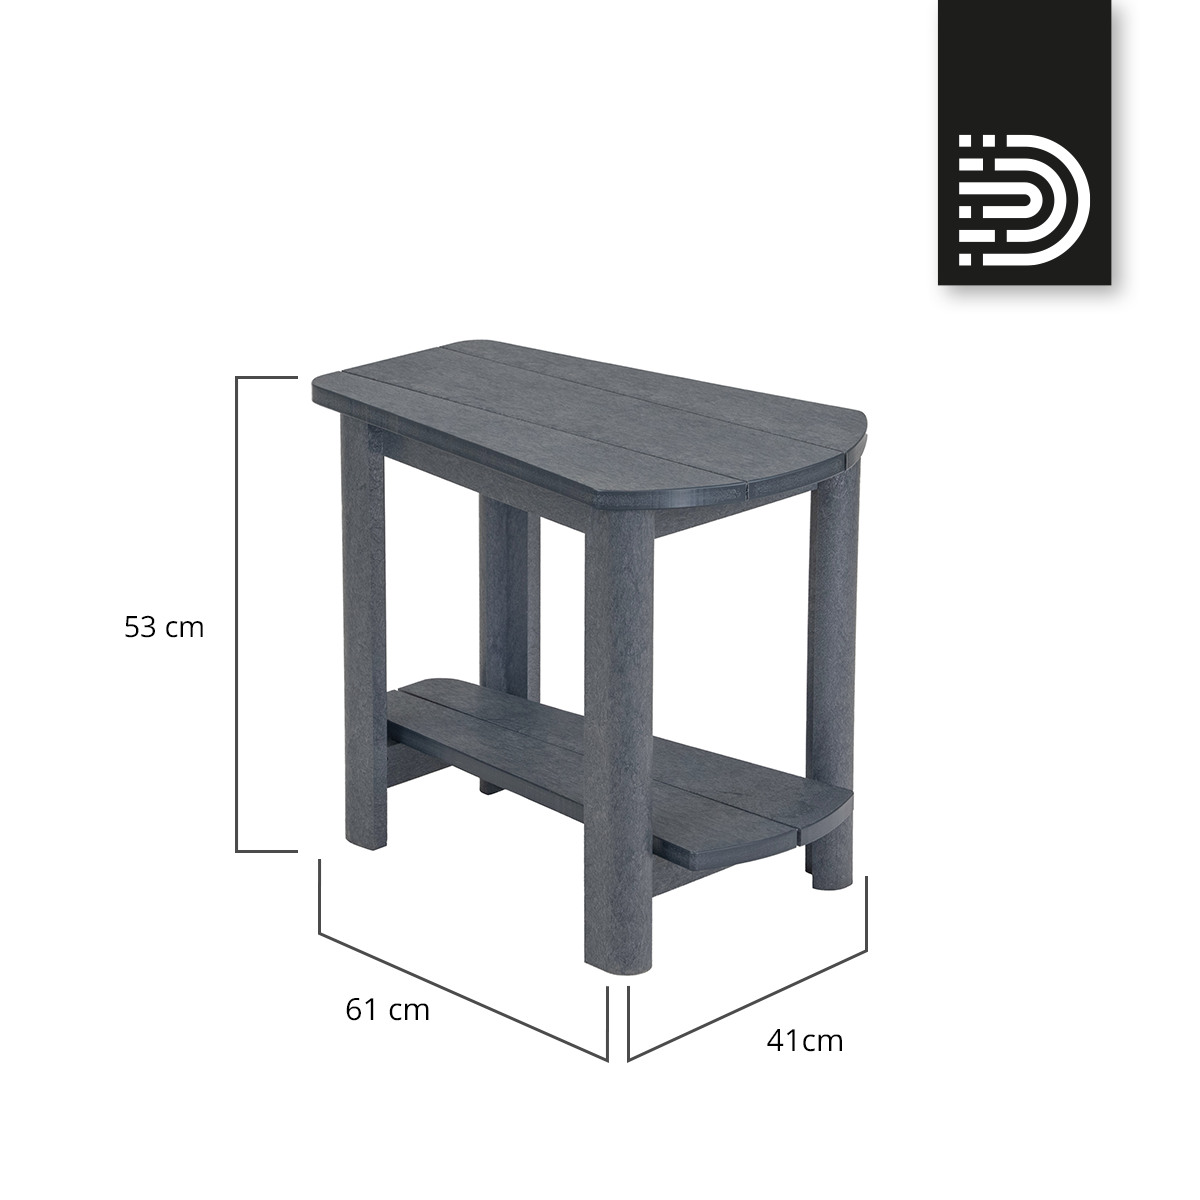 T04 Addy Side Table - Slate gray 18